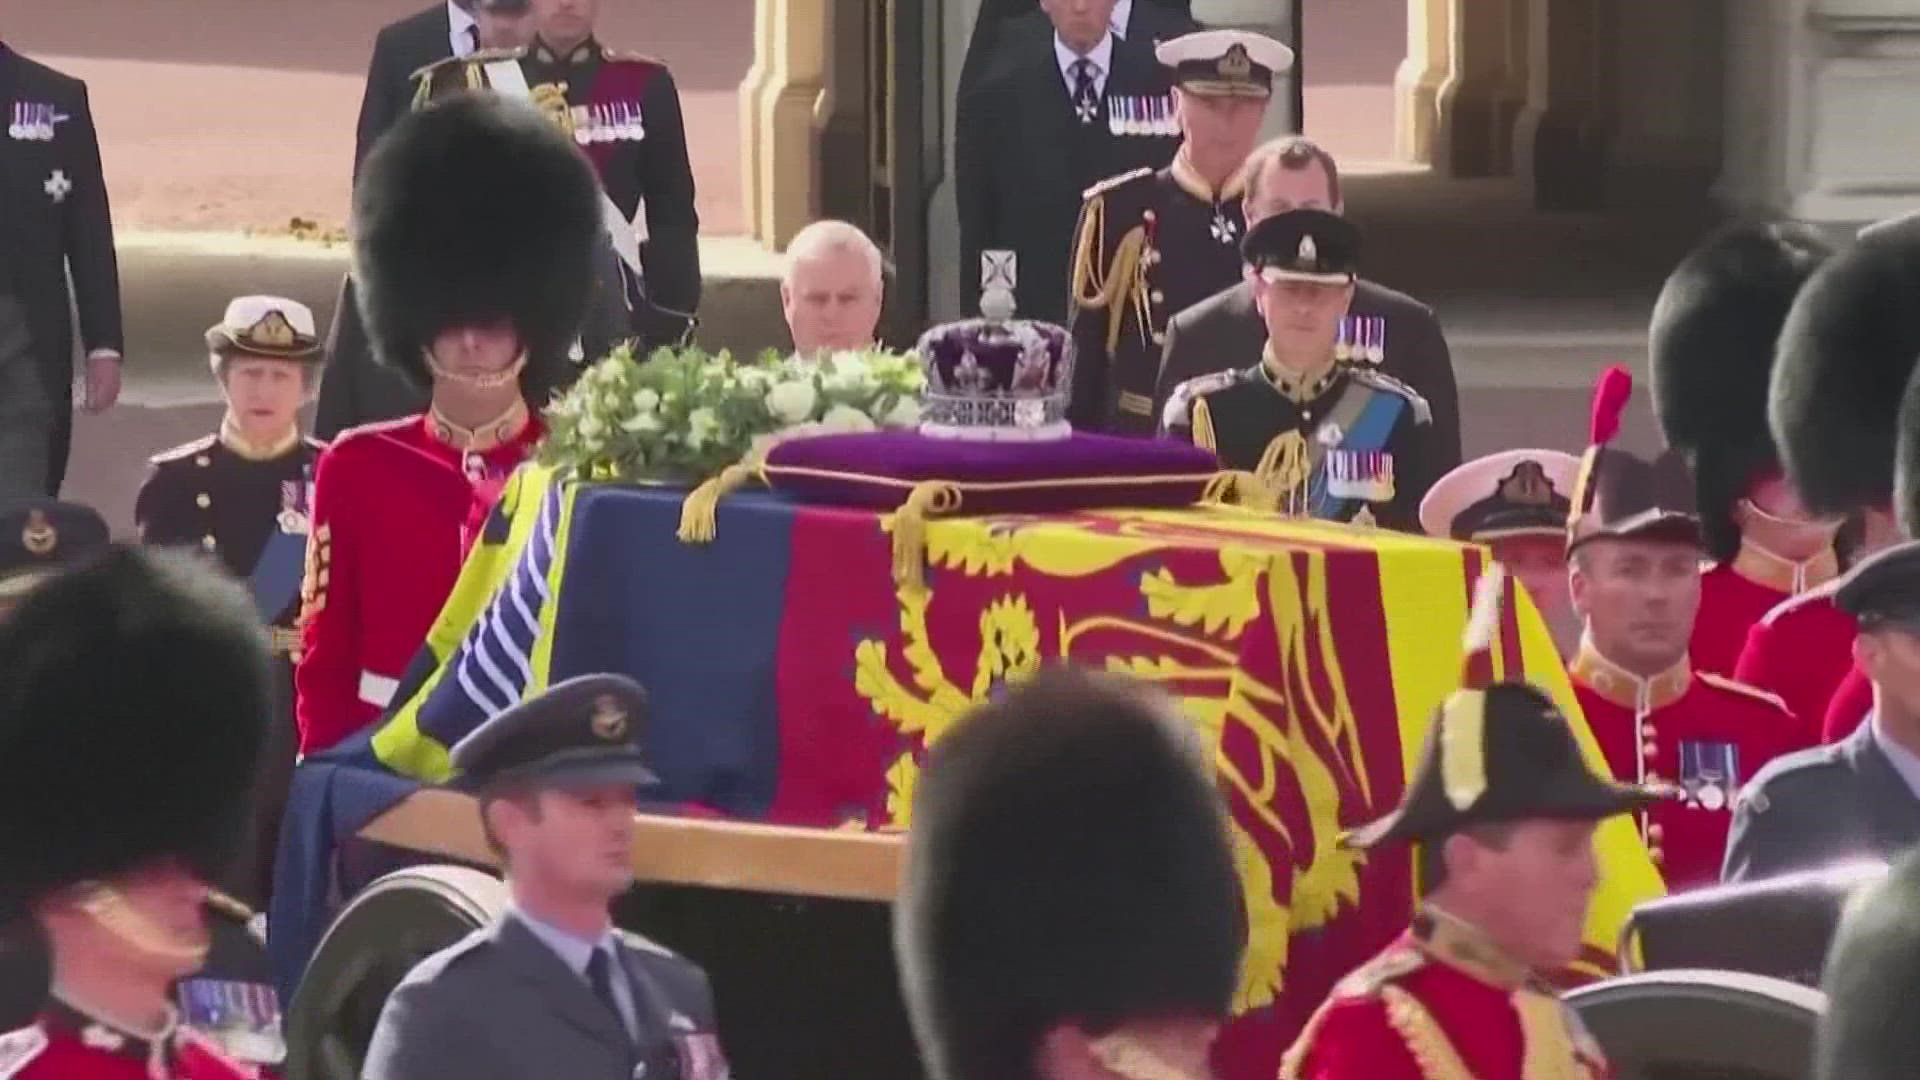 The late monarch’s coffin made the final journey from Balmoral Castle in northern Scotland, where the monarch died Thursday at age 96 after 70 years on the throne.